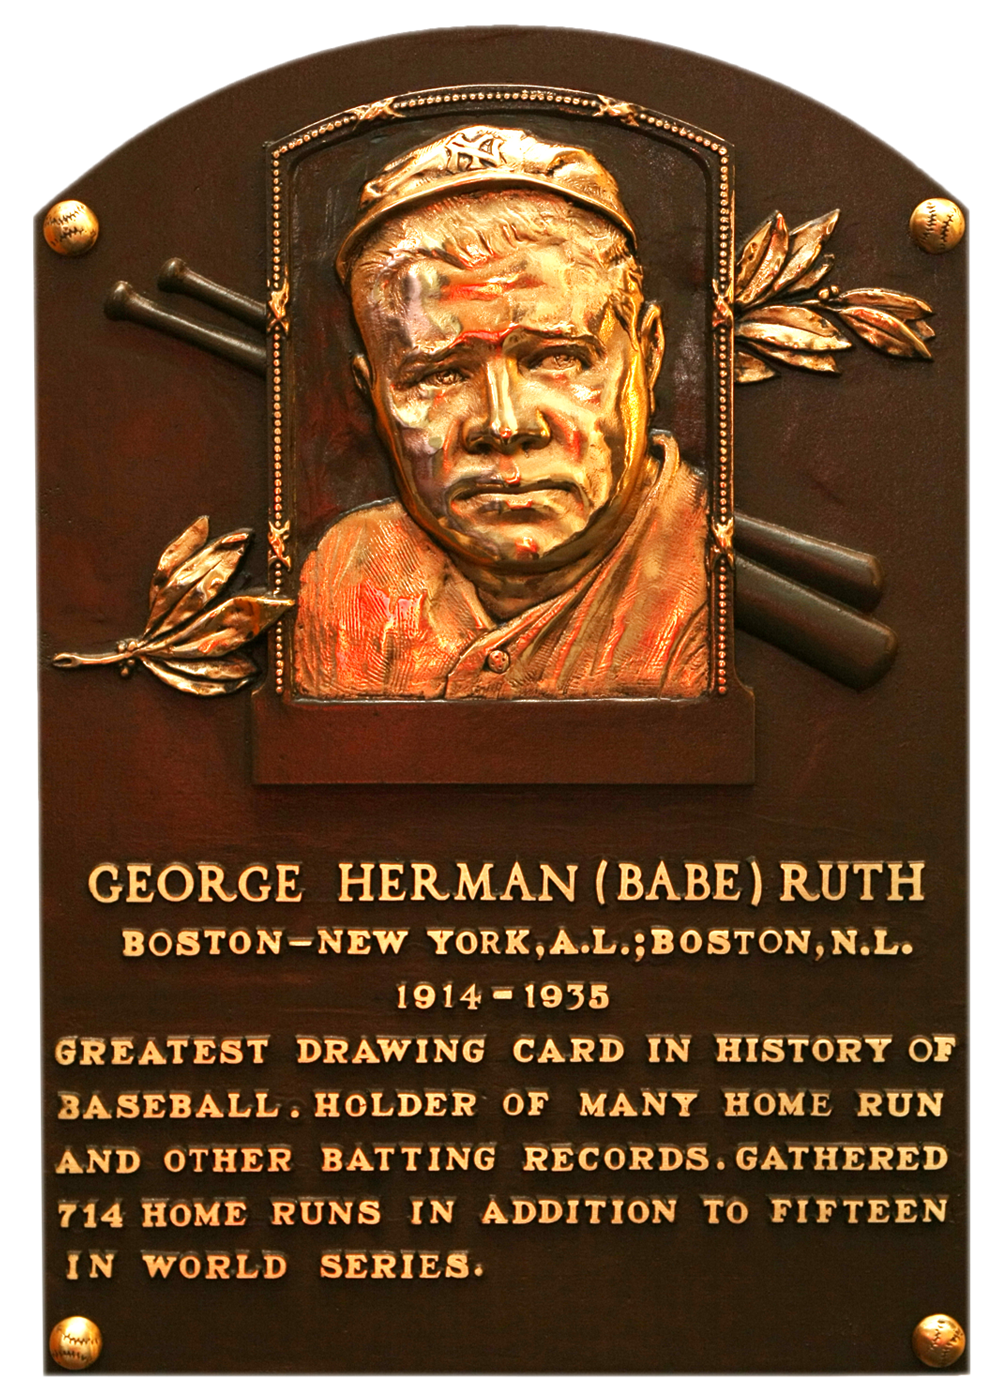 Babe Ruth Hall of Fame plaque